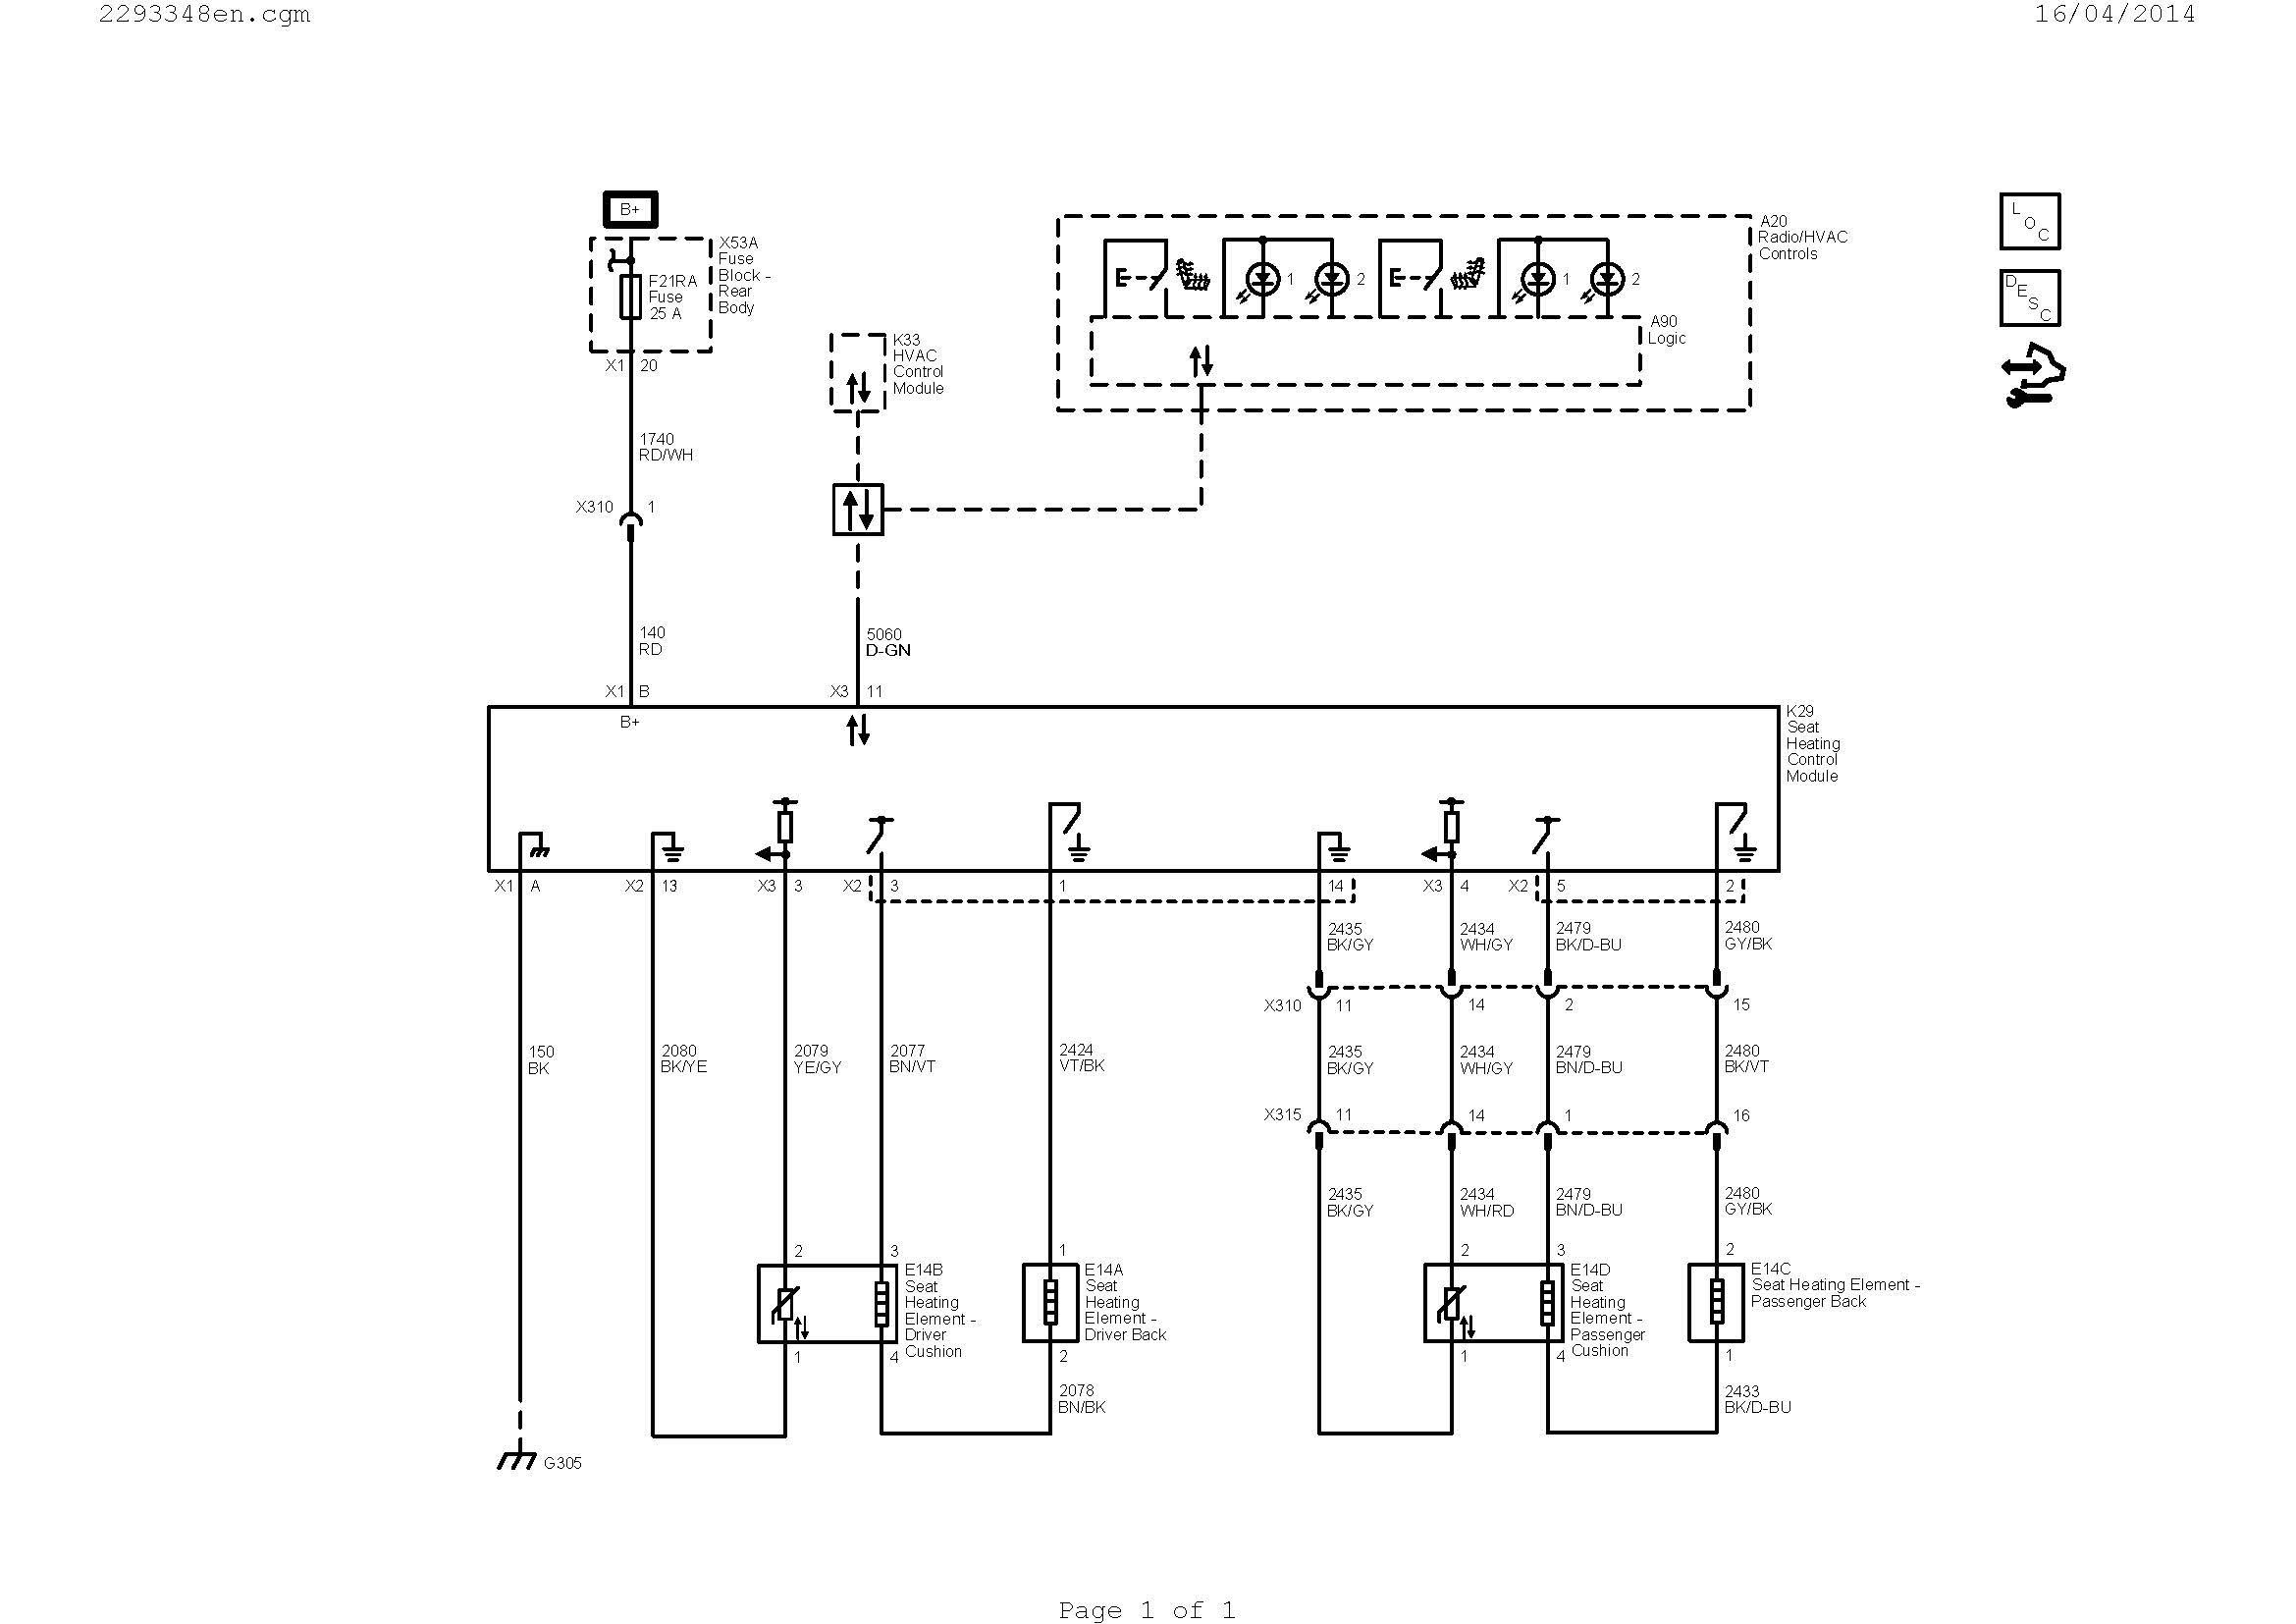 Wiring A Ac thermostat Diagram New Wiring Diagram Ac Valid Hvac Wiring Electric Baseboard Heaters